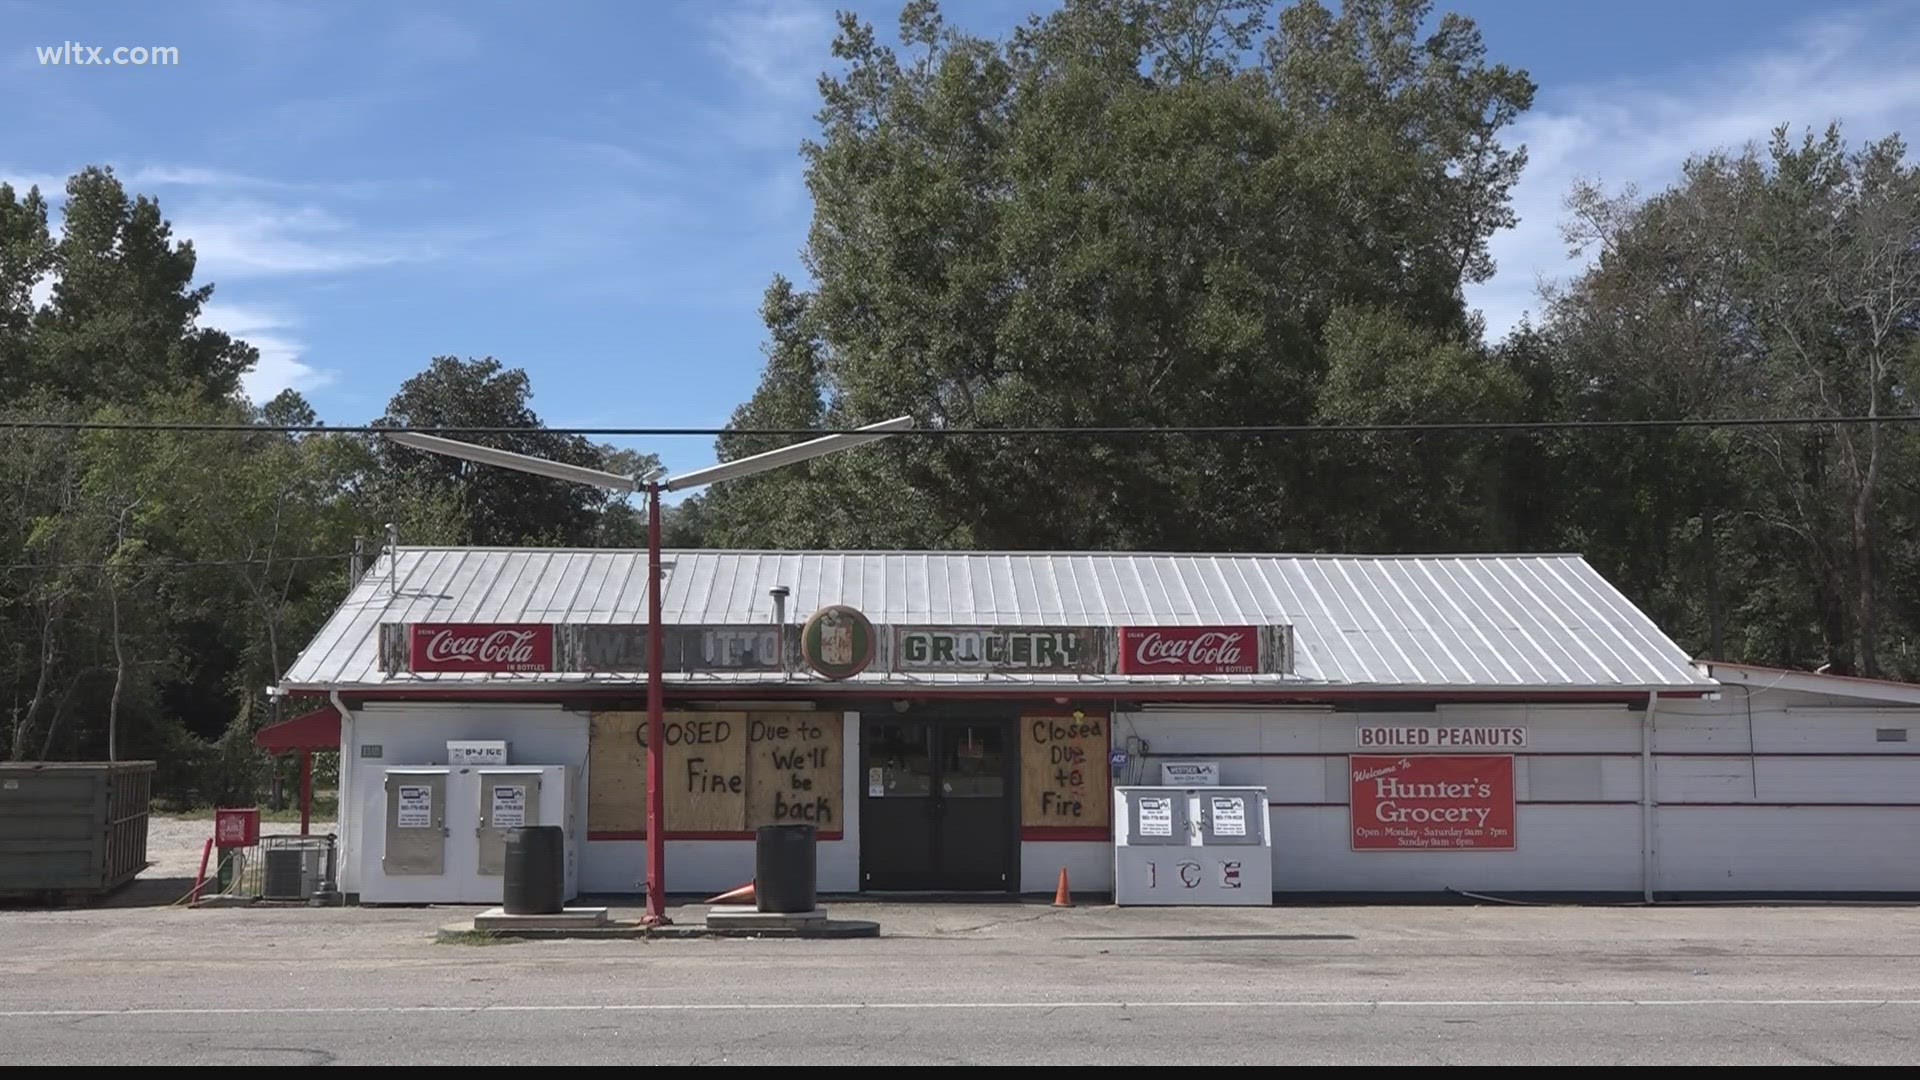 Hutto's Grocery has been a staple in the Orangeburg community since 1952, a fire destroyed the store over the weekend.